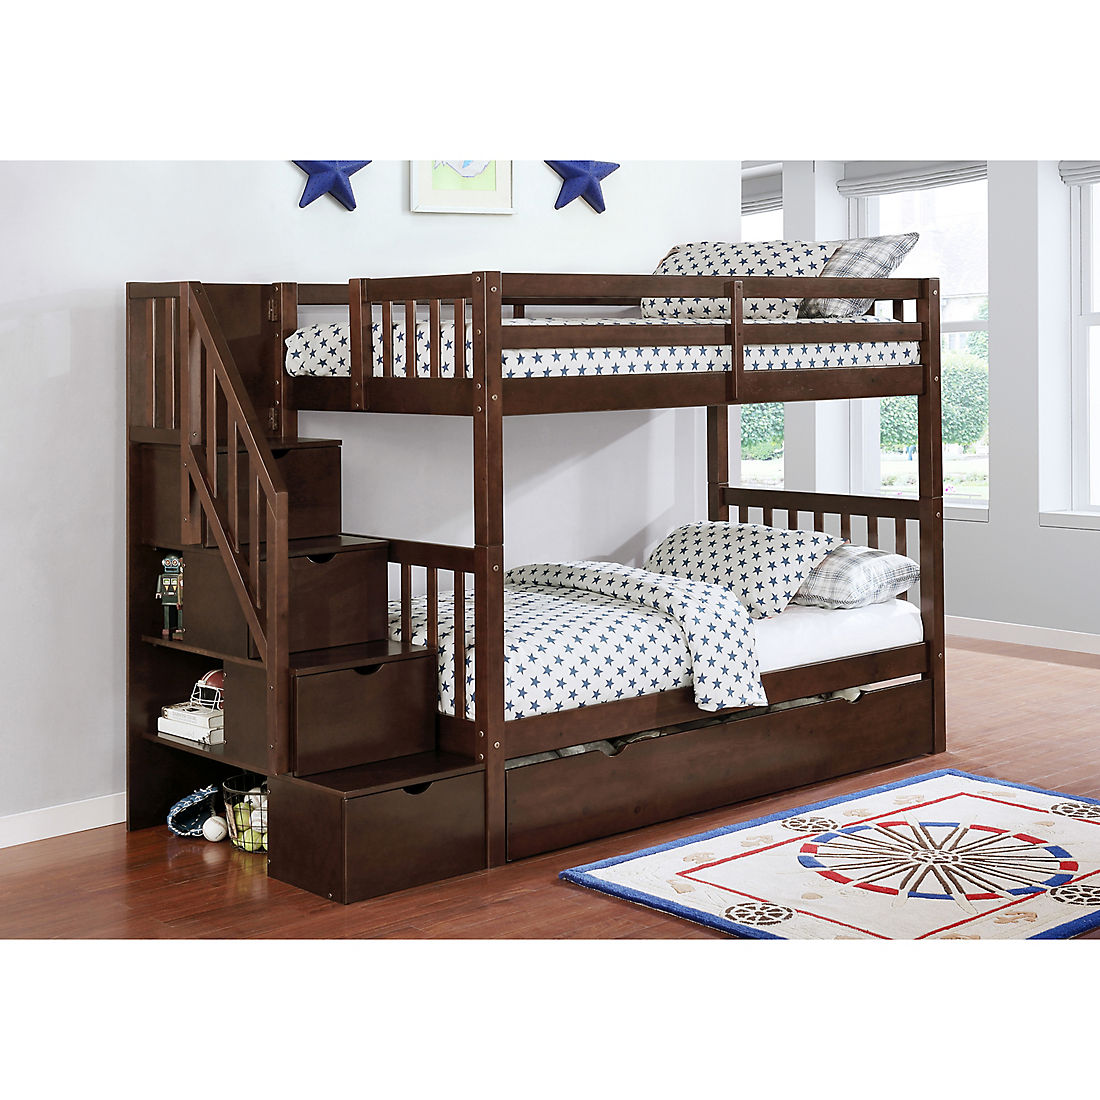 Berkley Jensen Twin Over Stairway, Rooms To Go Bunk Bed Assembly Instructions